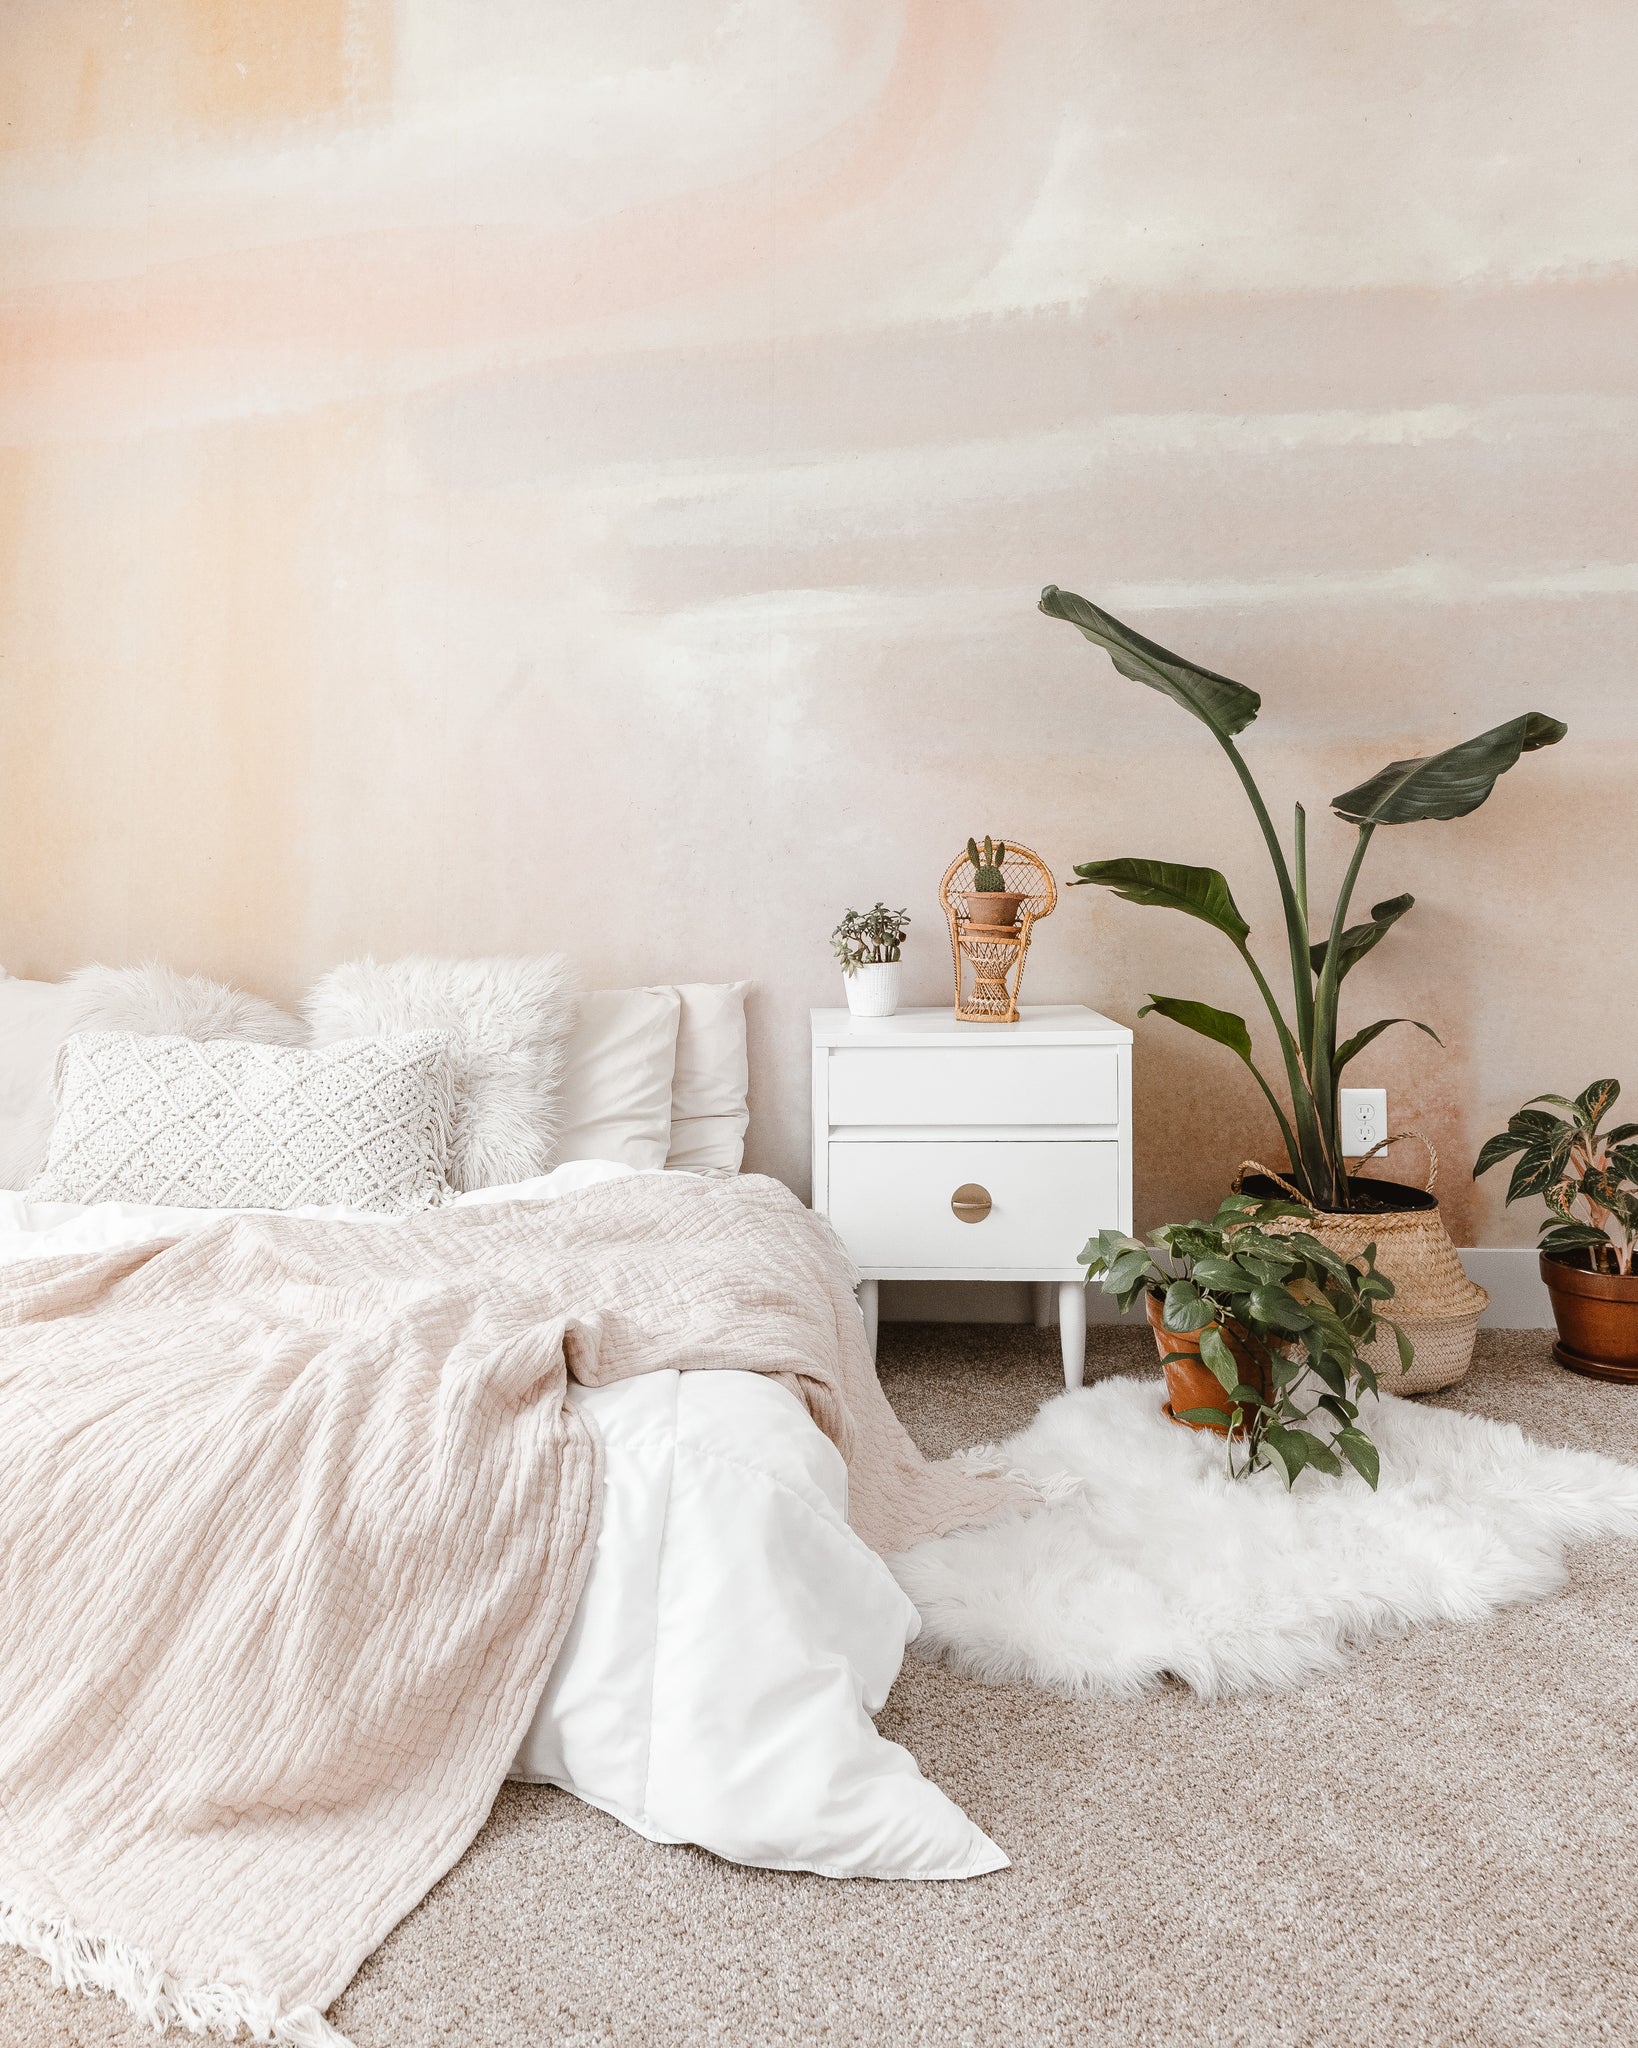 4 Wallpaper Trends You'll See in 2020